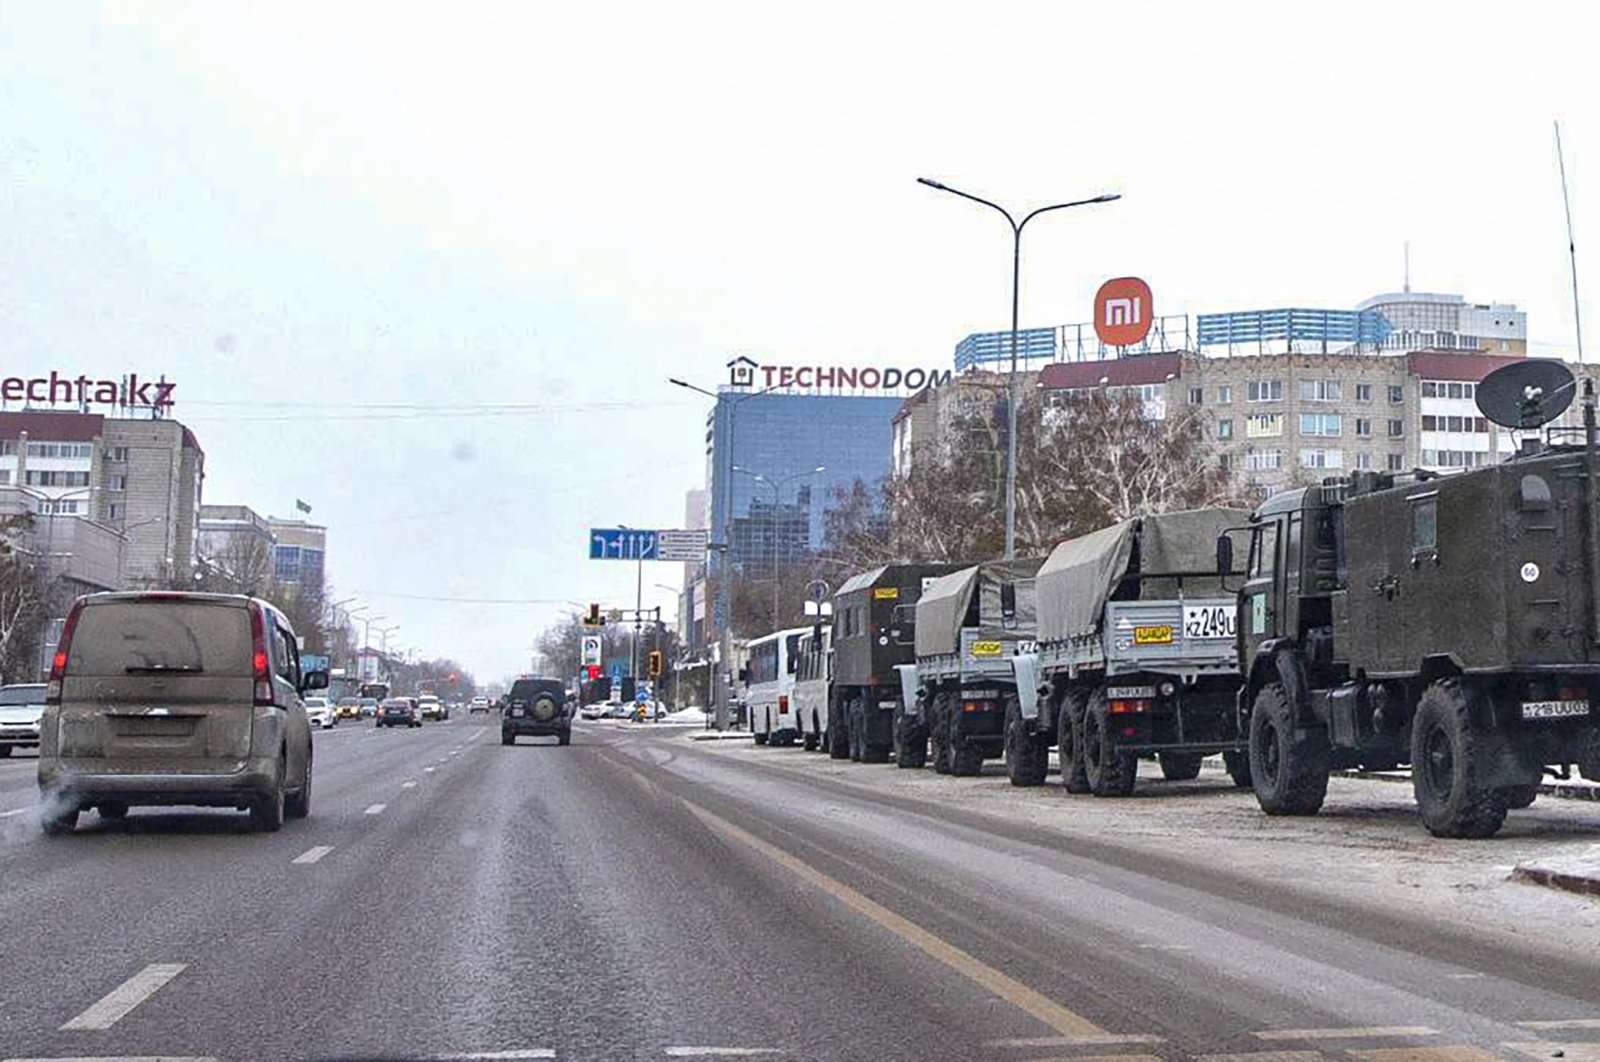 Kazakh military vehicles (R) parked at an area in downtown Nur-Sultan, the capital city of Kazakhstan, Jan. 8, 2022. (EPA Photo)